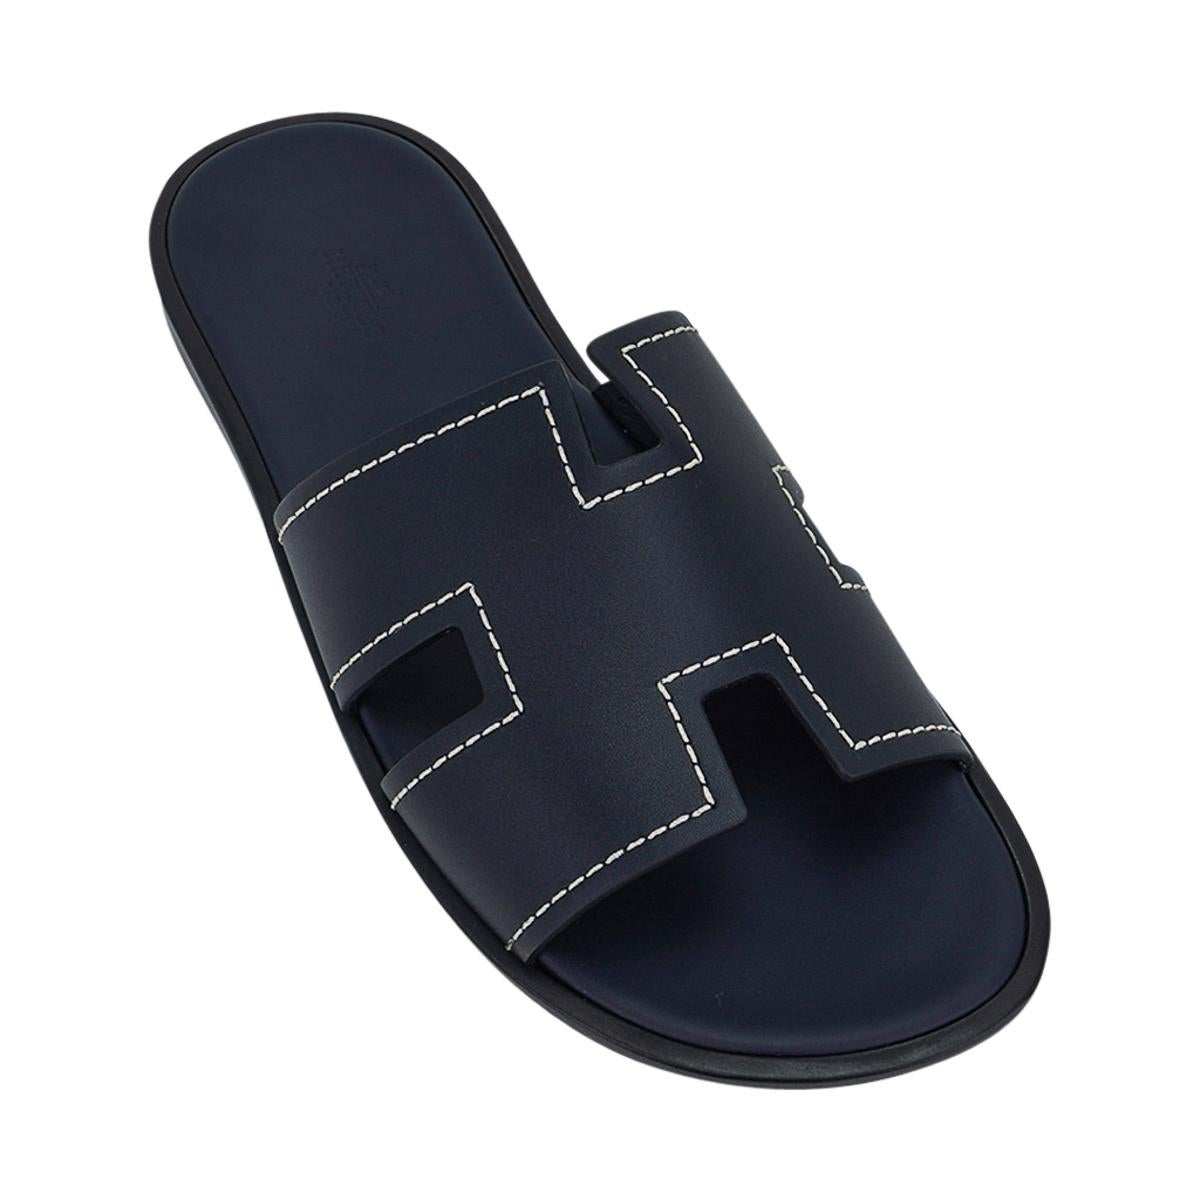 Mightychic offers a pair of Hermes Men's Izmir sandal featured in Bleu Marine.
The iconic H cutout over the top of the foot enhanced with white topstitch.
Sophisticated colours in a silhouette that works for every wardrobe.
Wood heel with leather